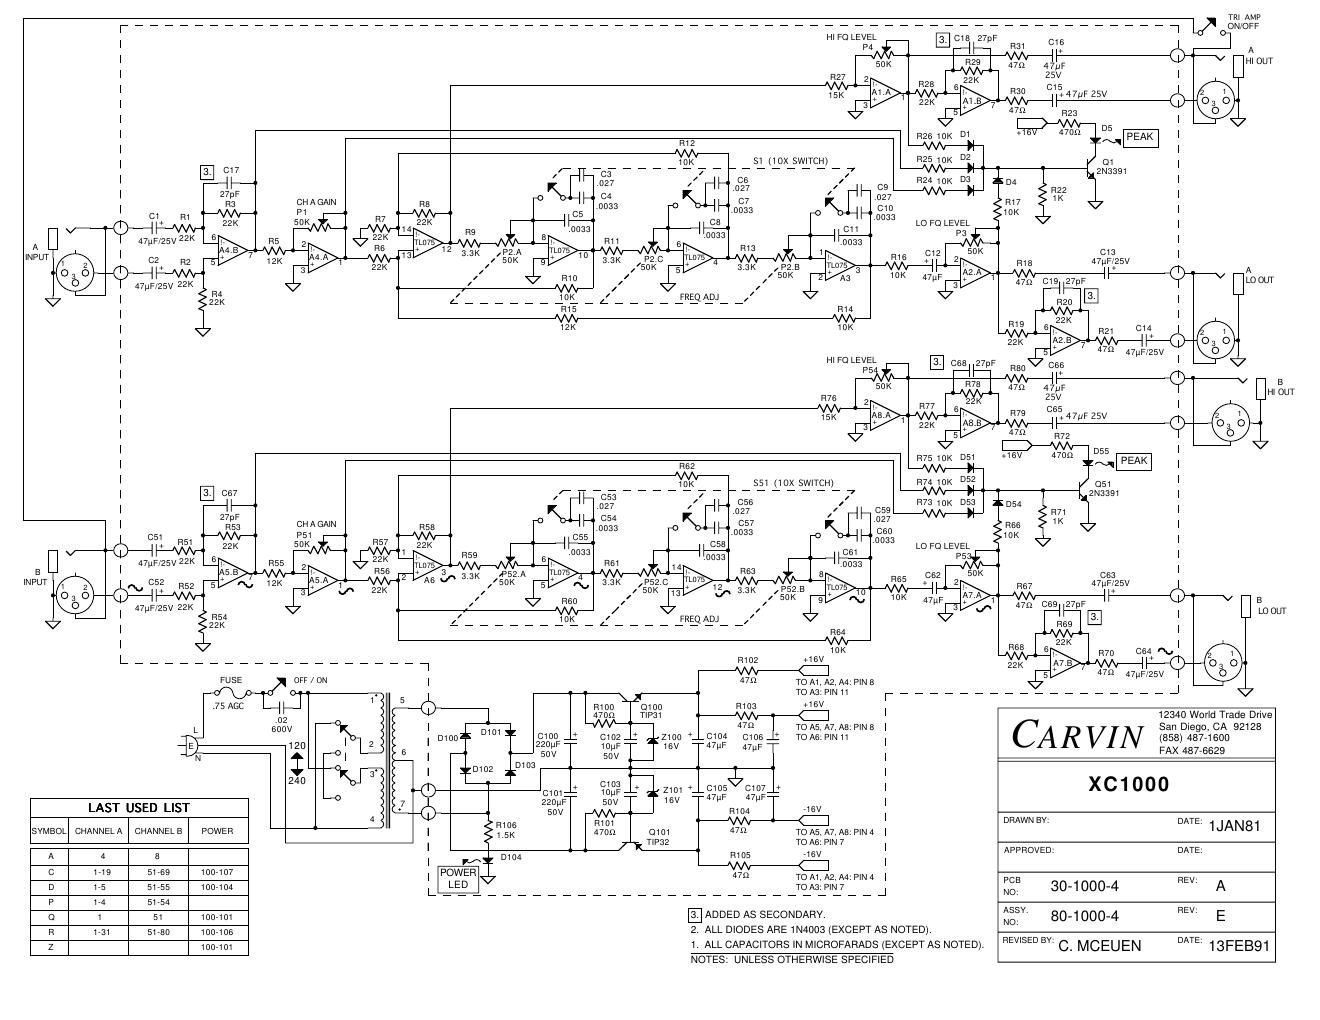 carvin xc 1000 stereo 2 way crossover schematic